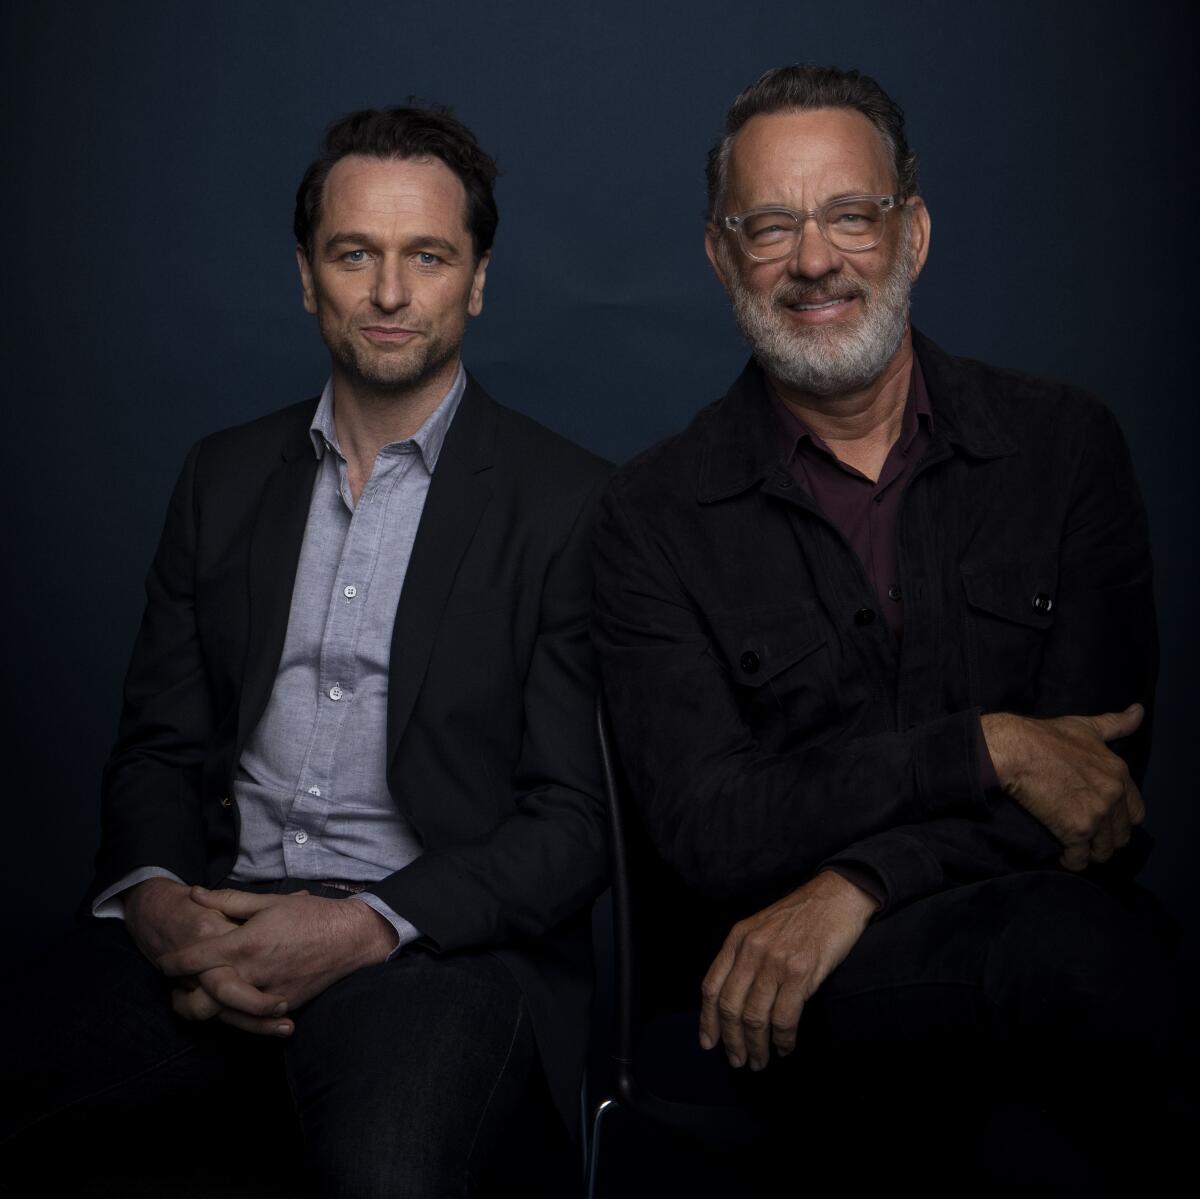 Matthew Rhys and Tom Hanks, who star in "A Beautiful Day in the Neighborhood."